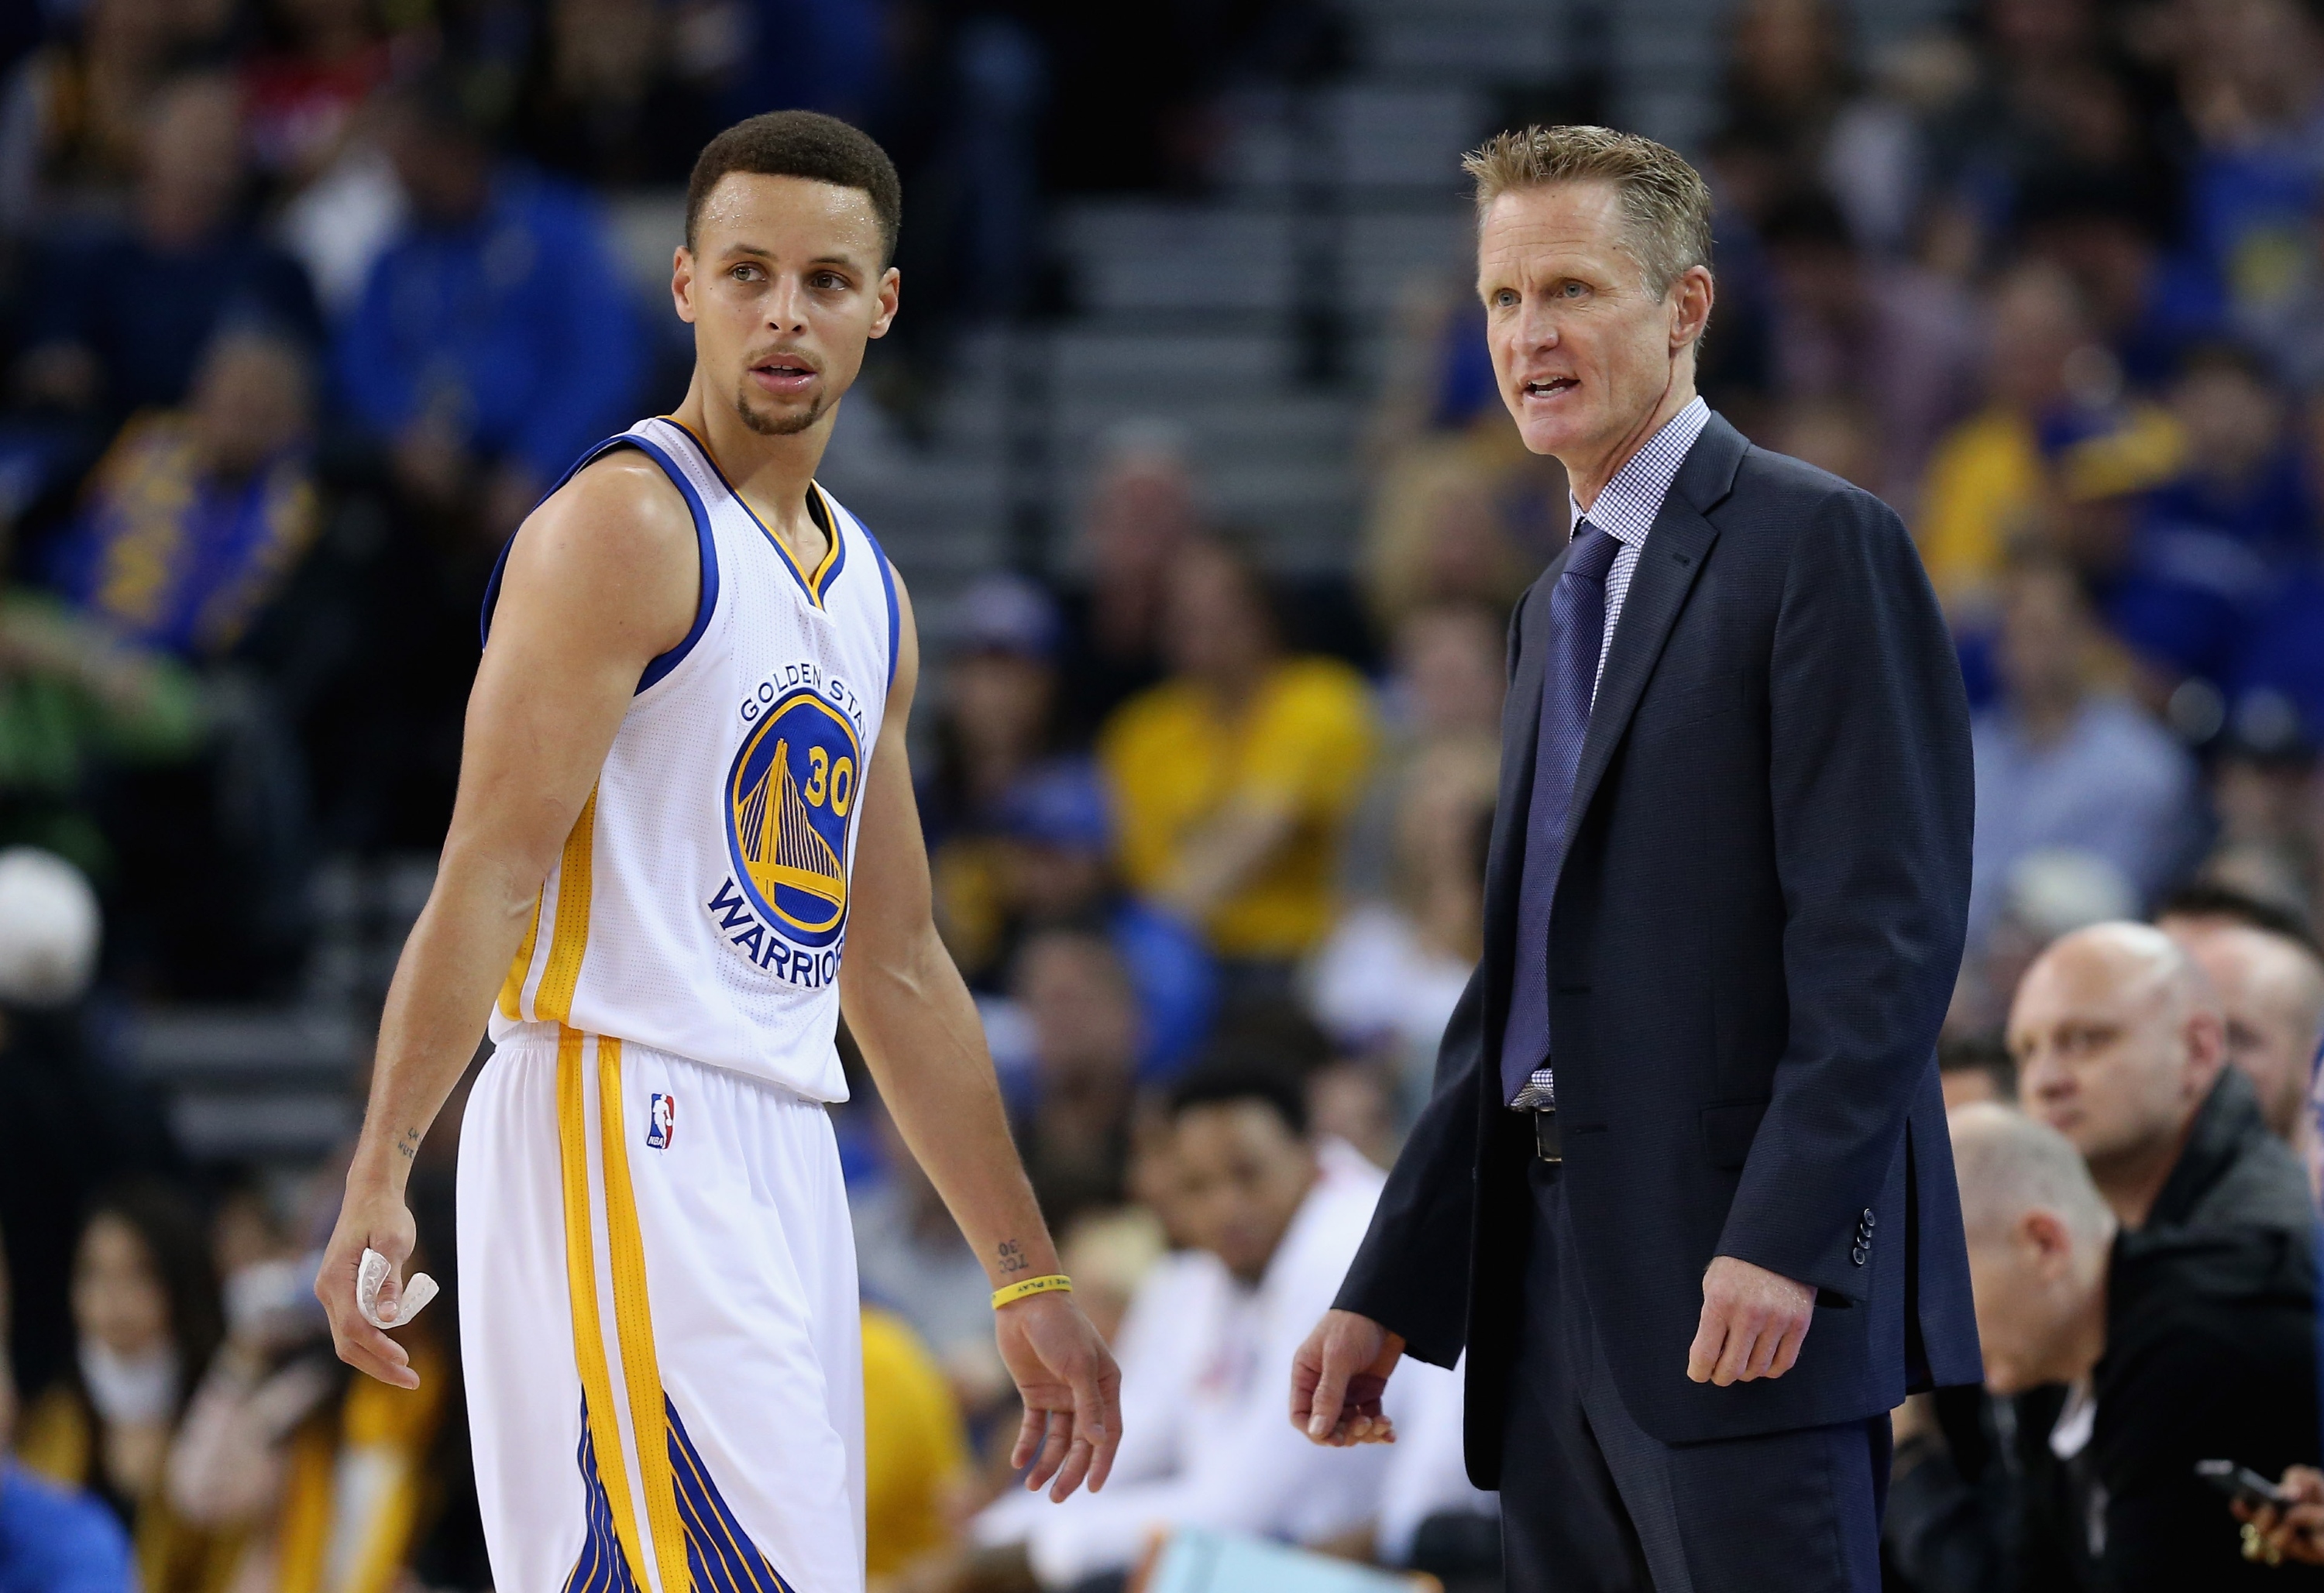 Steve Kerr checks to see if Stephen Curry needs a breather. (Ezra Shaw/Getty Images)